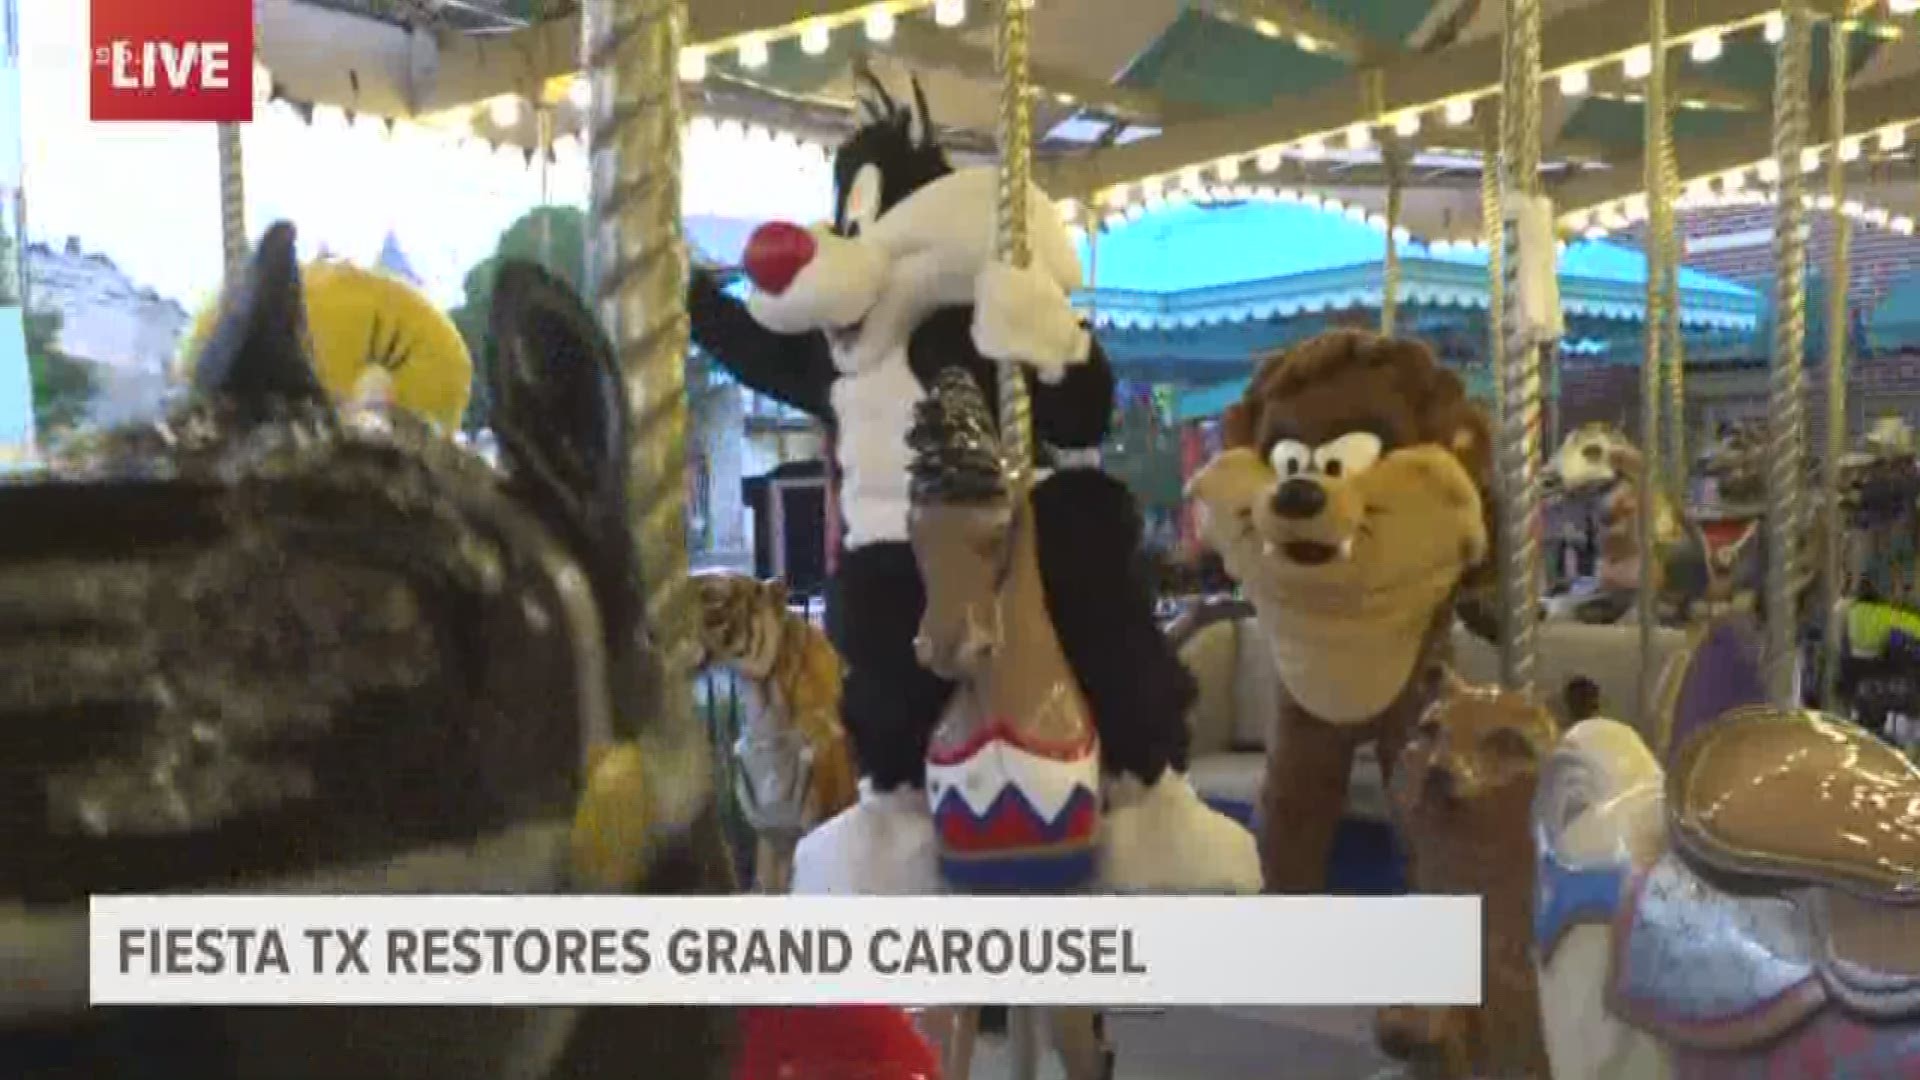 It's an oldie but goodie! The restored ride re-opens Friday. KENS 5's Audrey Castoreno got a preview.